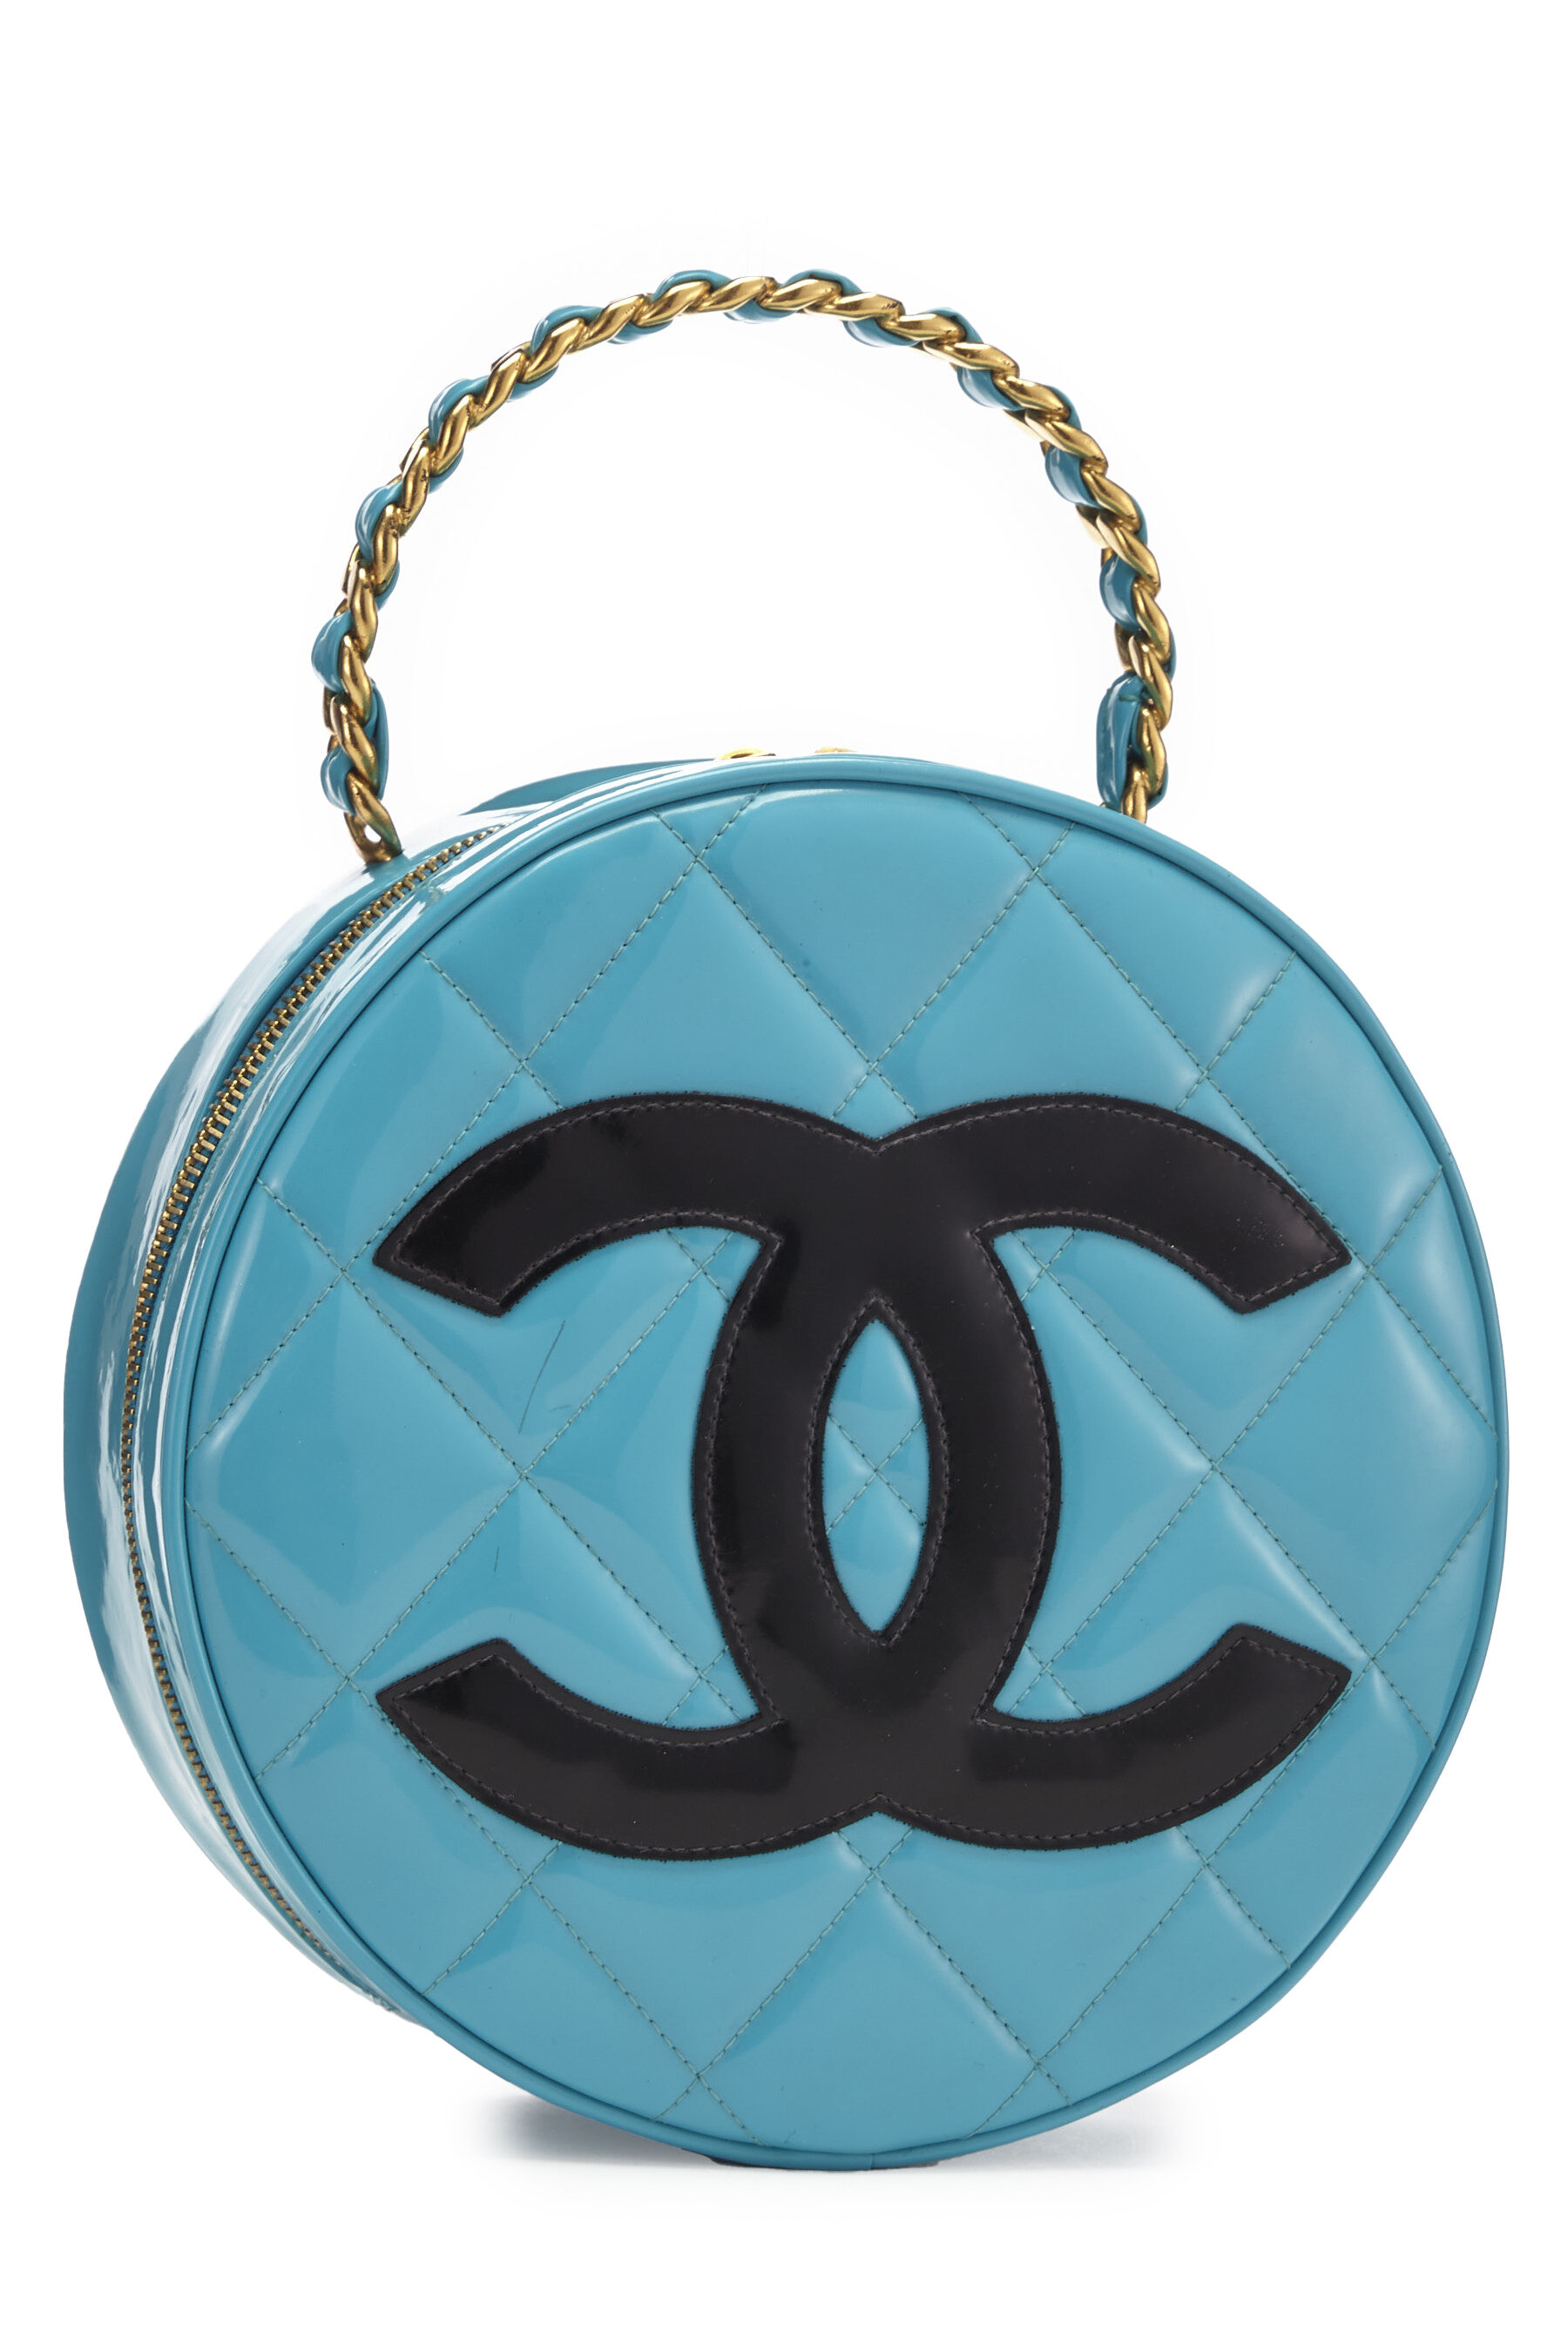 Snag the Latest CHANEL Blue Patent Bags & Handbags for Women with Fast and  Free Shipping. Authenticity Guaranteed on Designer Handbags $500+ at .